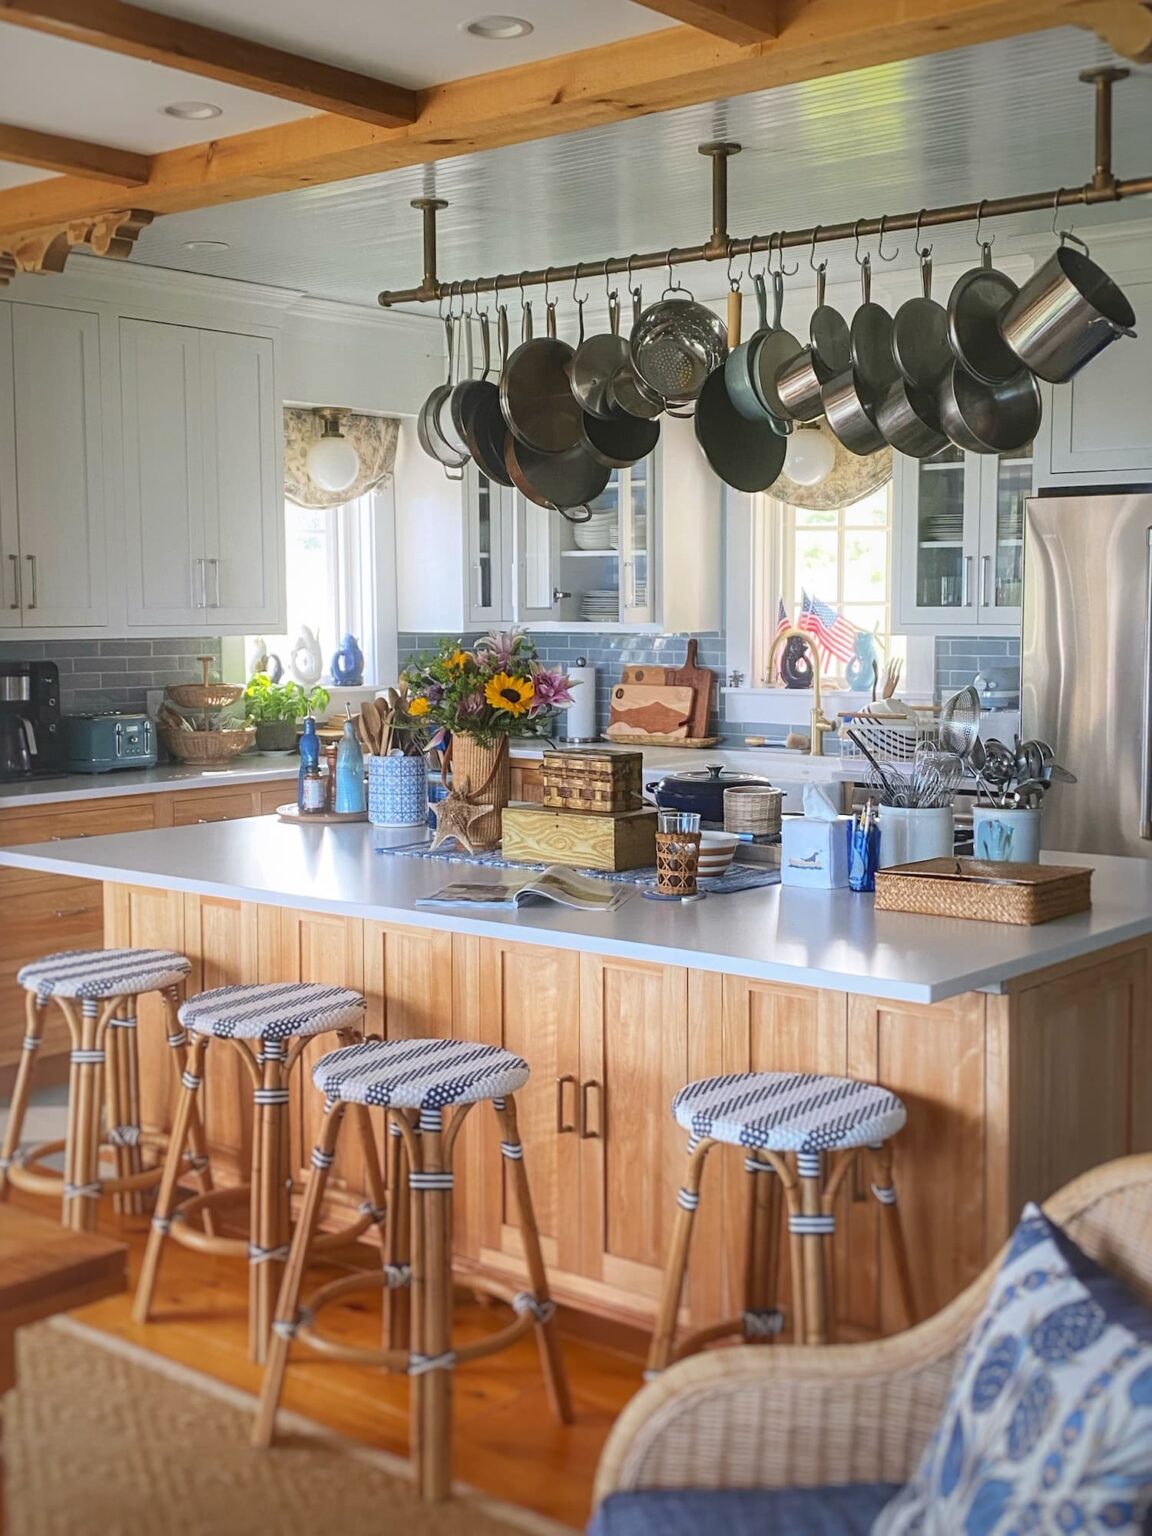 All The Details On Our Coastal Maine Cottage Kitchen Design 9 1152x1536 